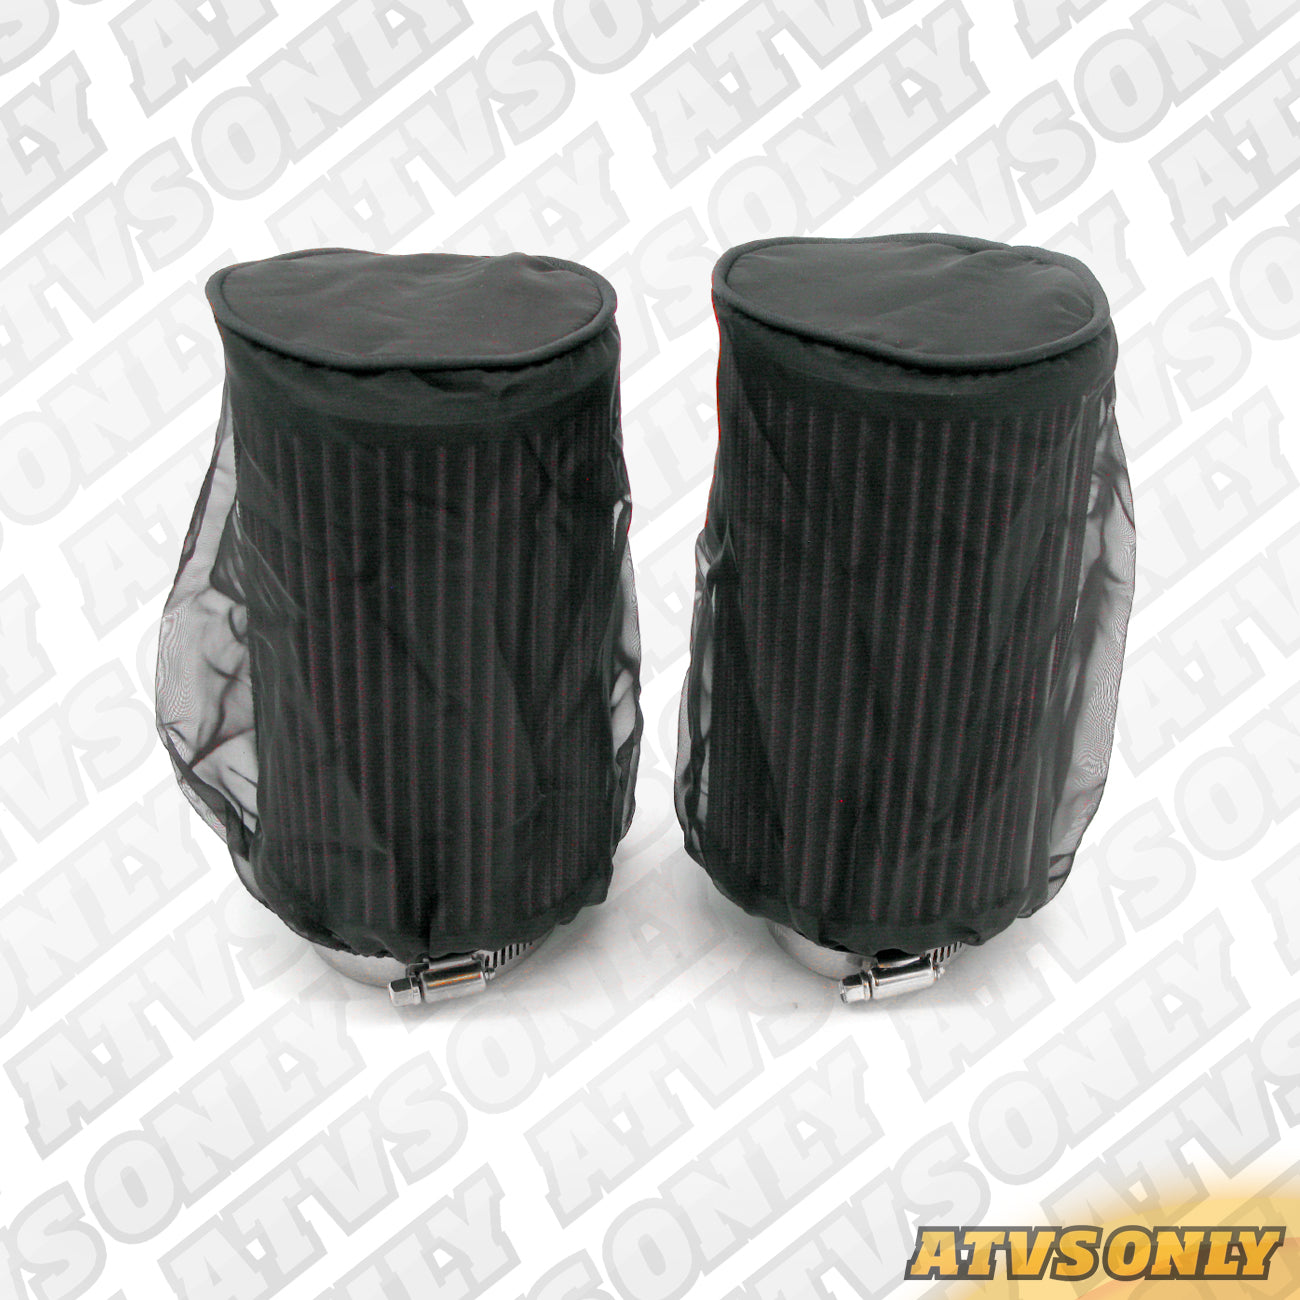 Air Filter (K&N) with Outerwear for Yamaha Banshee